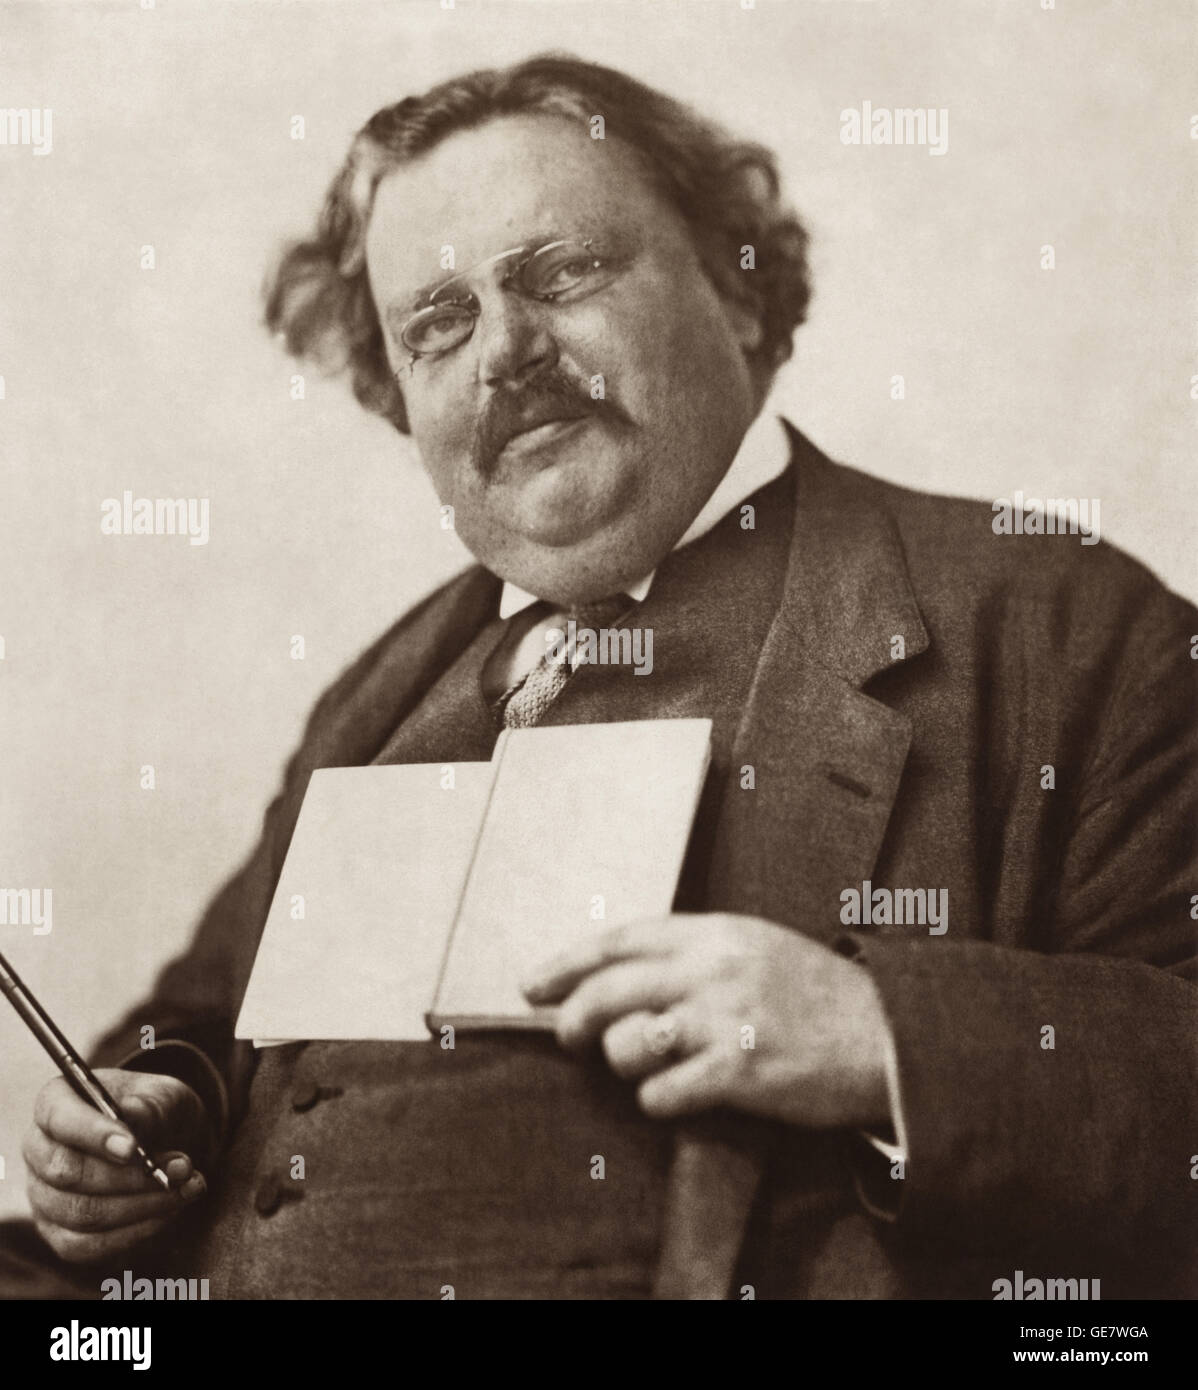 G.K. (Gilbert Keith) Chesterton (shown c1912) was a leading British author, thinker, journalist, arts critic, debater, lay theologian and Christian apologist of the early 20th Century. A prolific writer, he published nearly 100 books and over 4,000 newspaper columns and essays. Stock Photo